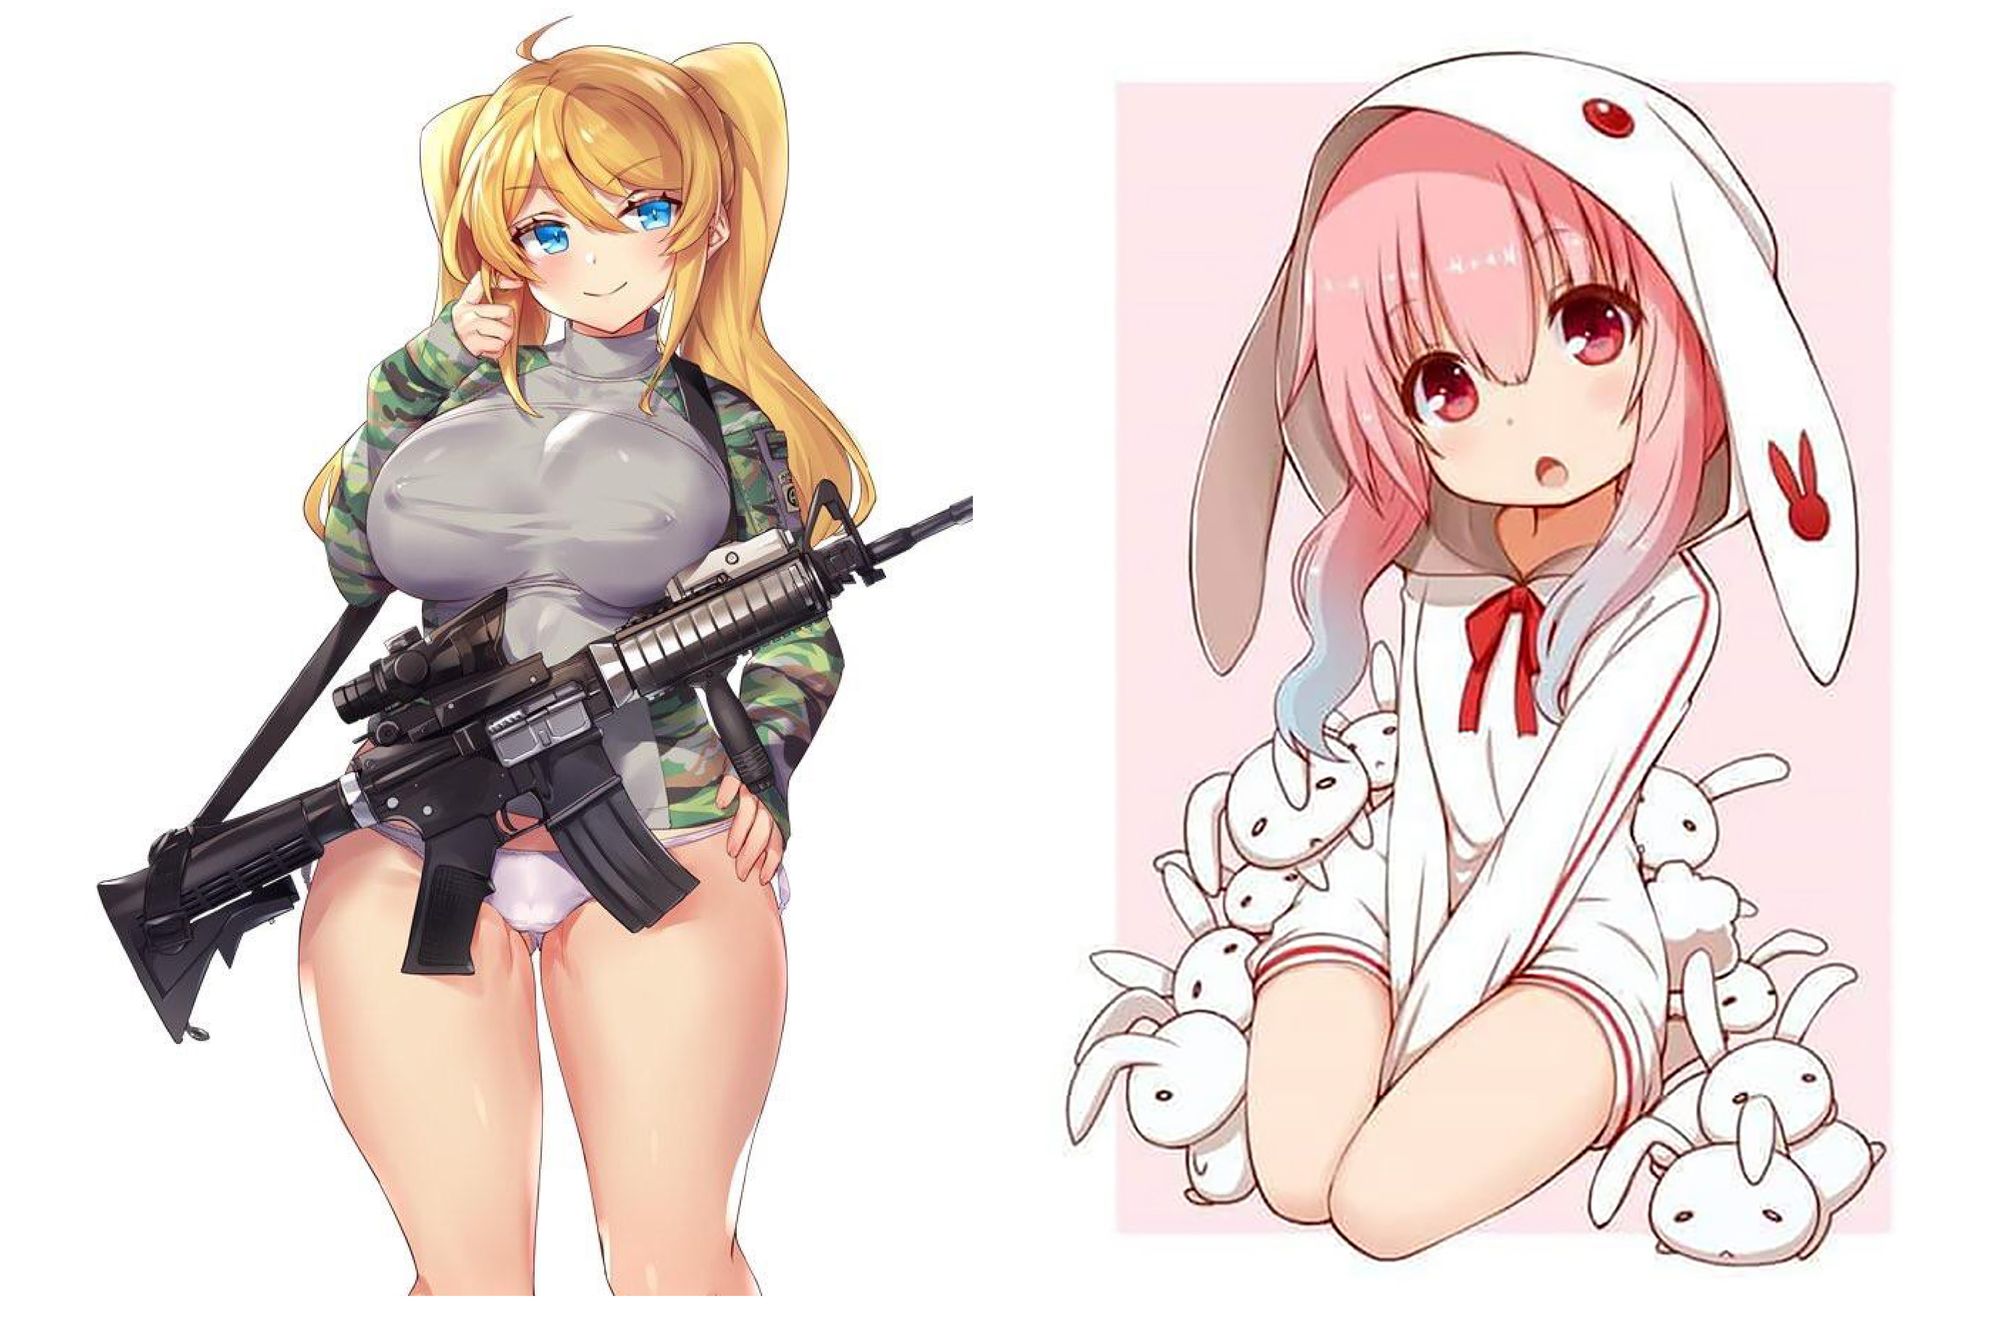 Left: An anime drawing of a hypersexualized woman with large bosom. She is lightly dressed, wearing only panties, an almost see-through tight-fitting shirt that shows her nipples, and an army jacket. Around her neck she wears a machine gun. Her facial expression seems almost childlike and innocent. On the right: an anime drawing of a girl wearing a white dress with bunny ears. She is surrounded by plush bunnies. Her hands are shyly hidden between her thighs, and her big eyes and open mouth give her an expression between childlike surprise and sexual attraction.